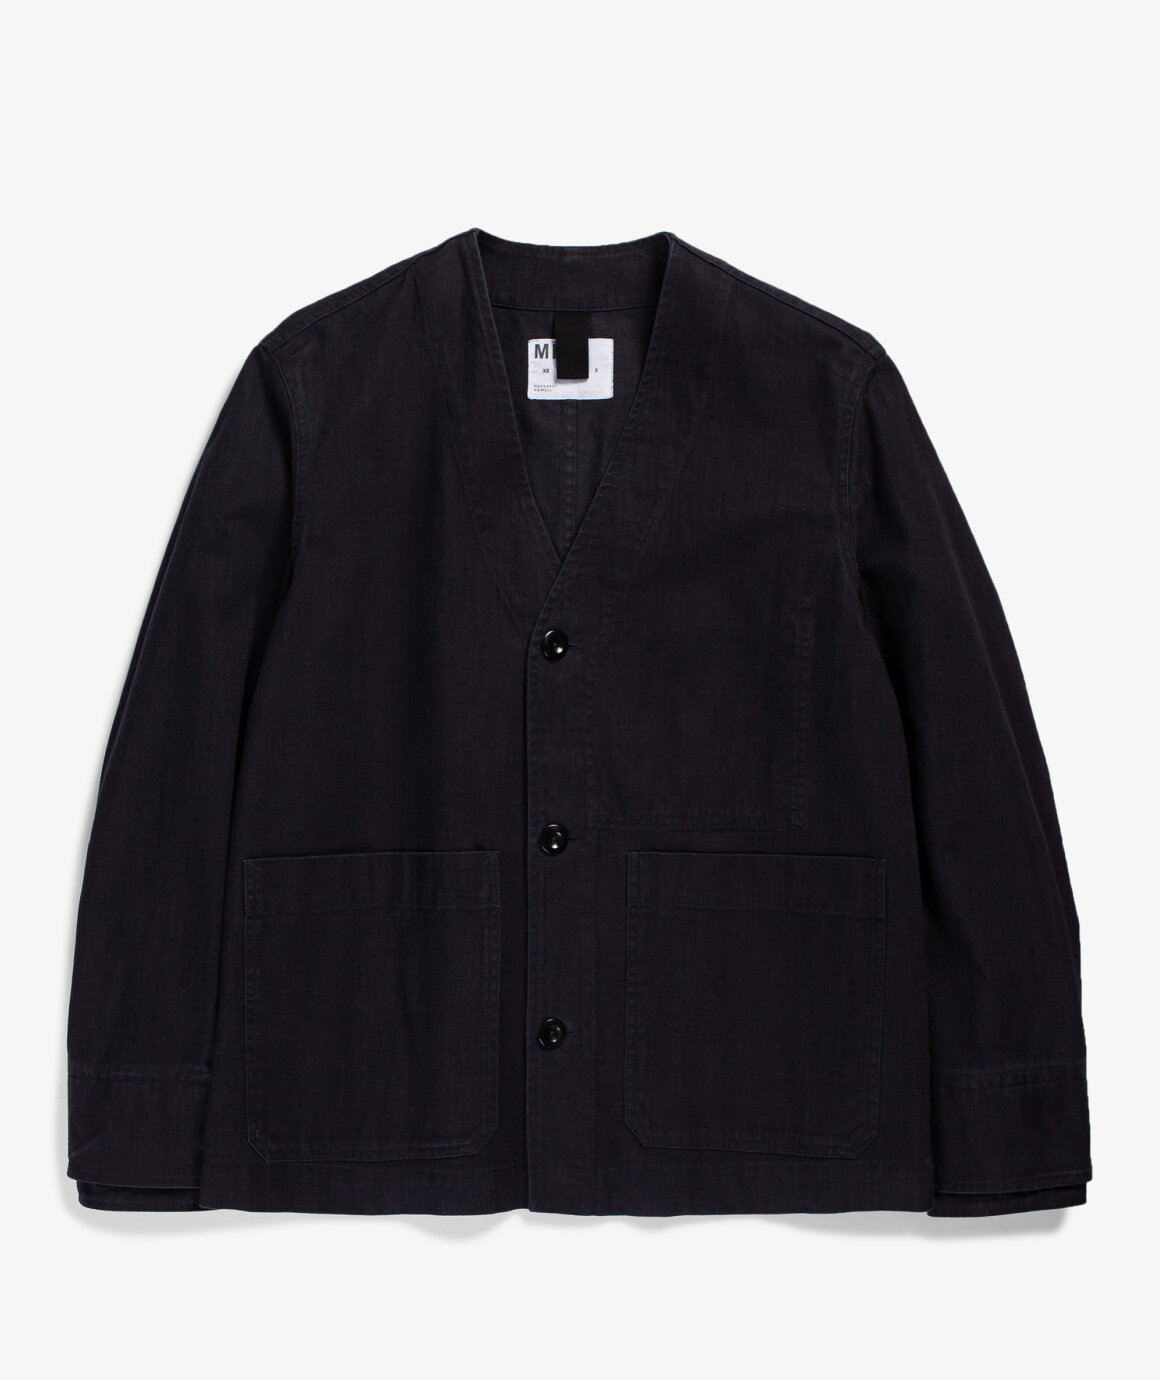 Norse Store | Shipping Worldwide - Margaret Howell MHL Woven Cardigan ...